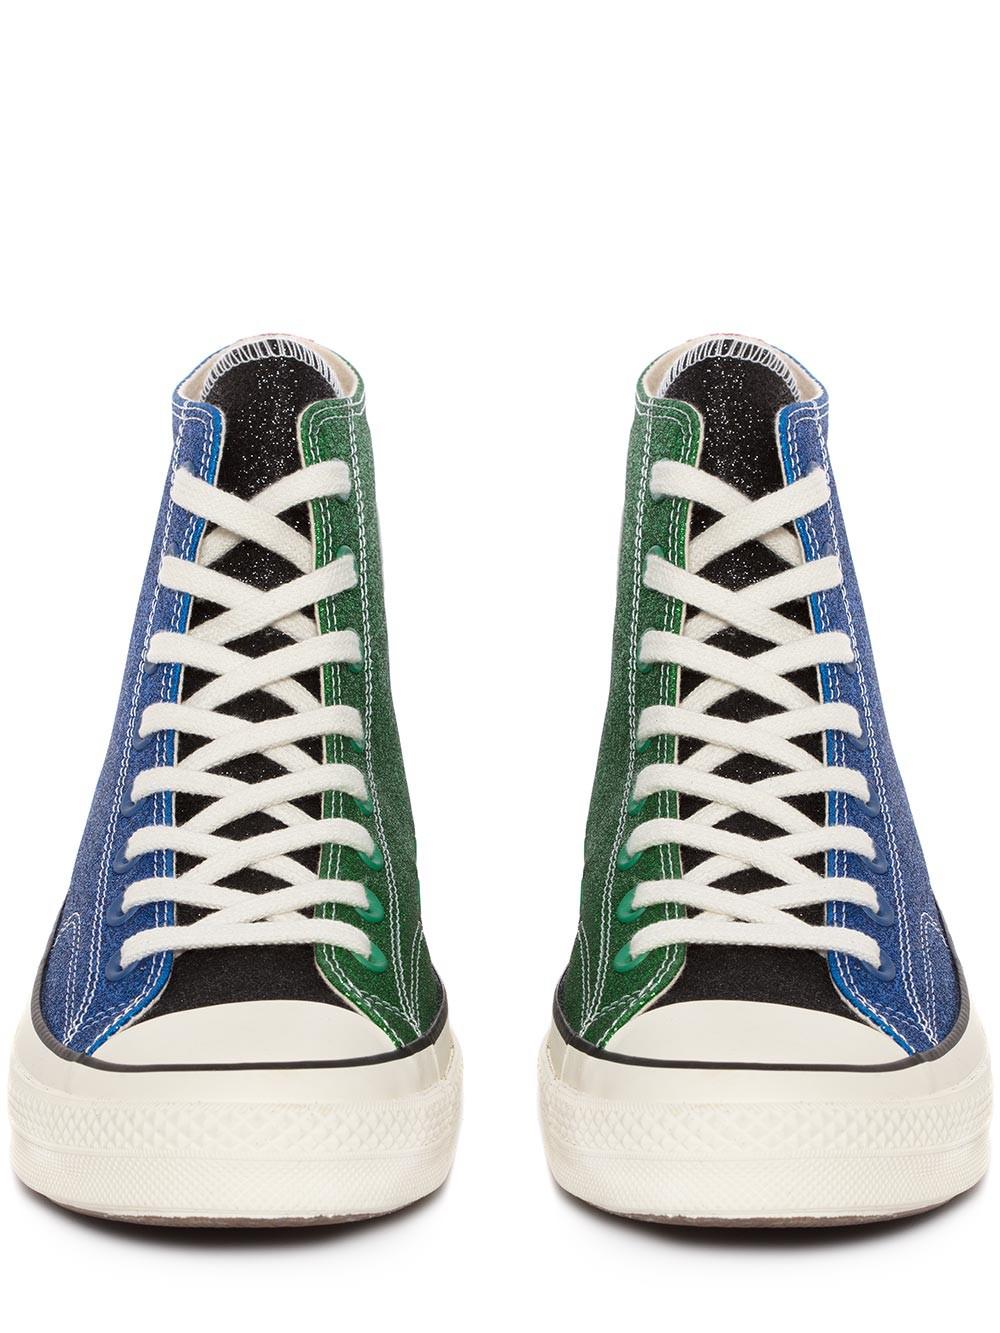 Jw Anderson Converse Glitter Green Top Sellers, SAVE 32% - lutheranems.com